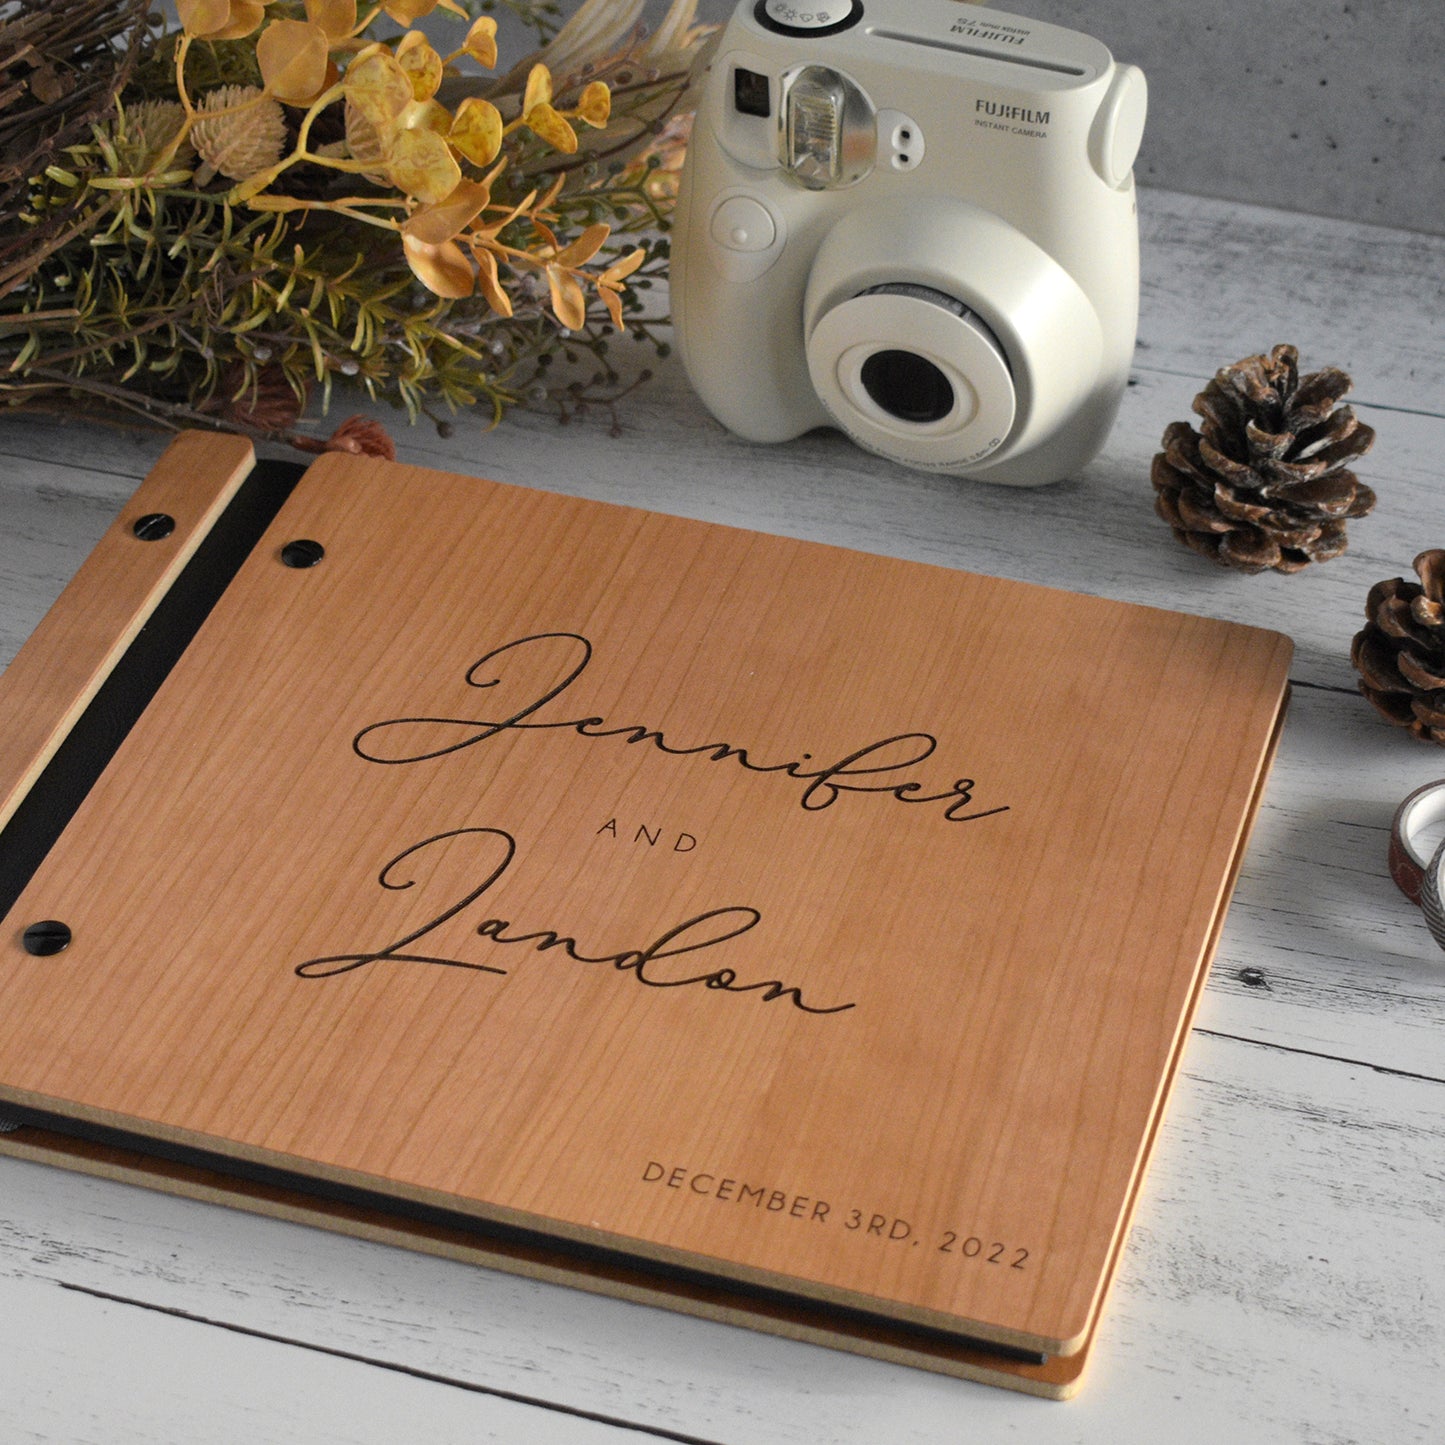 An 8.5x11" guest book lies on a table. Made of cherry wood, black vegan leather binding, and copper hardware. The front cover reads “Jonathan and Christina, January 1, 2023.” 